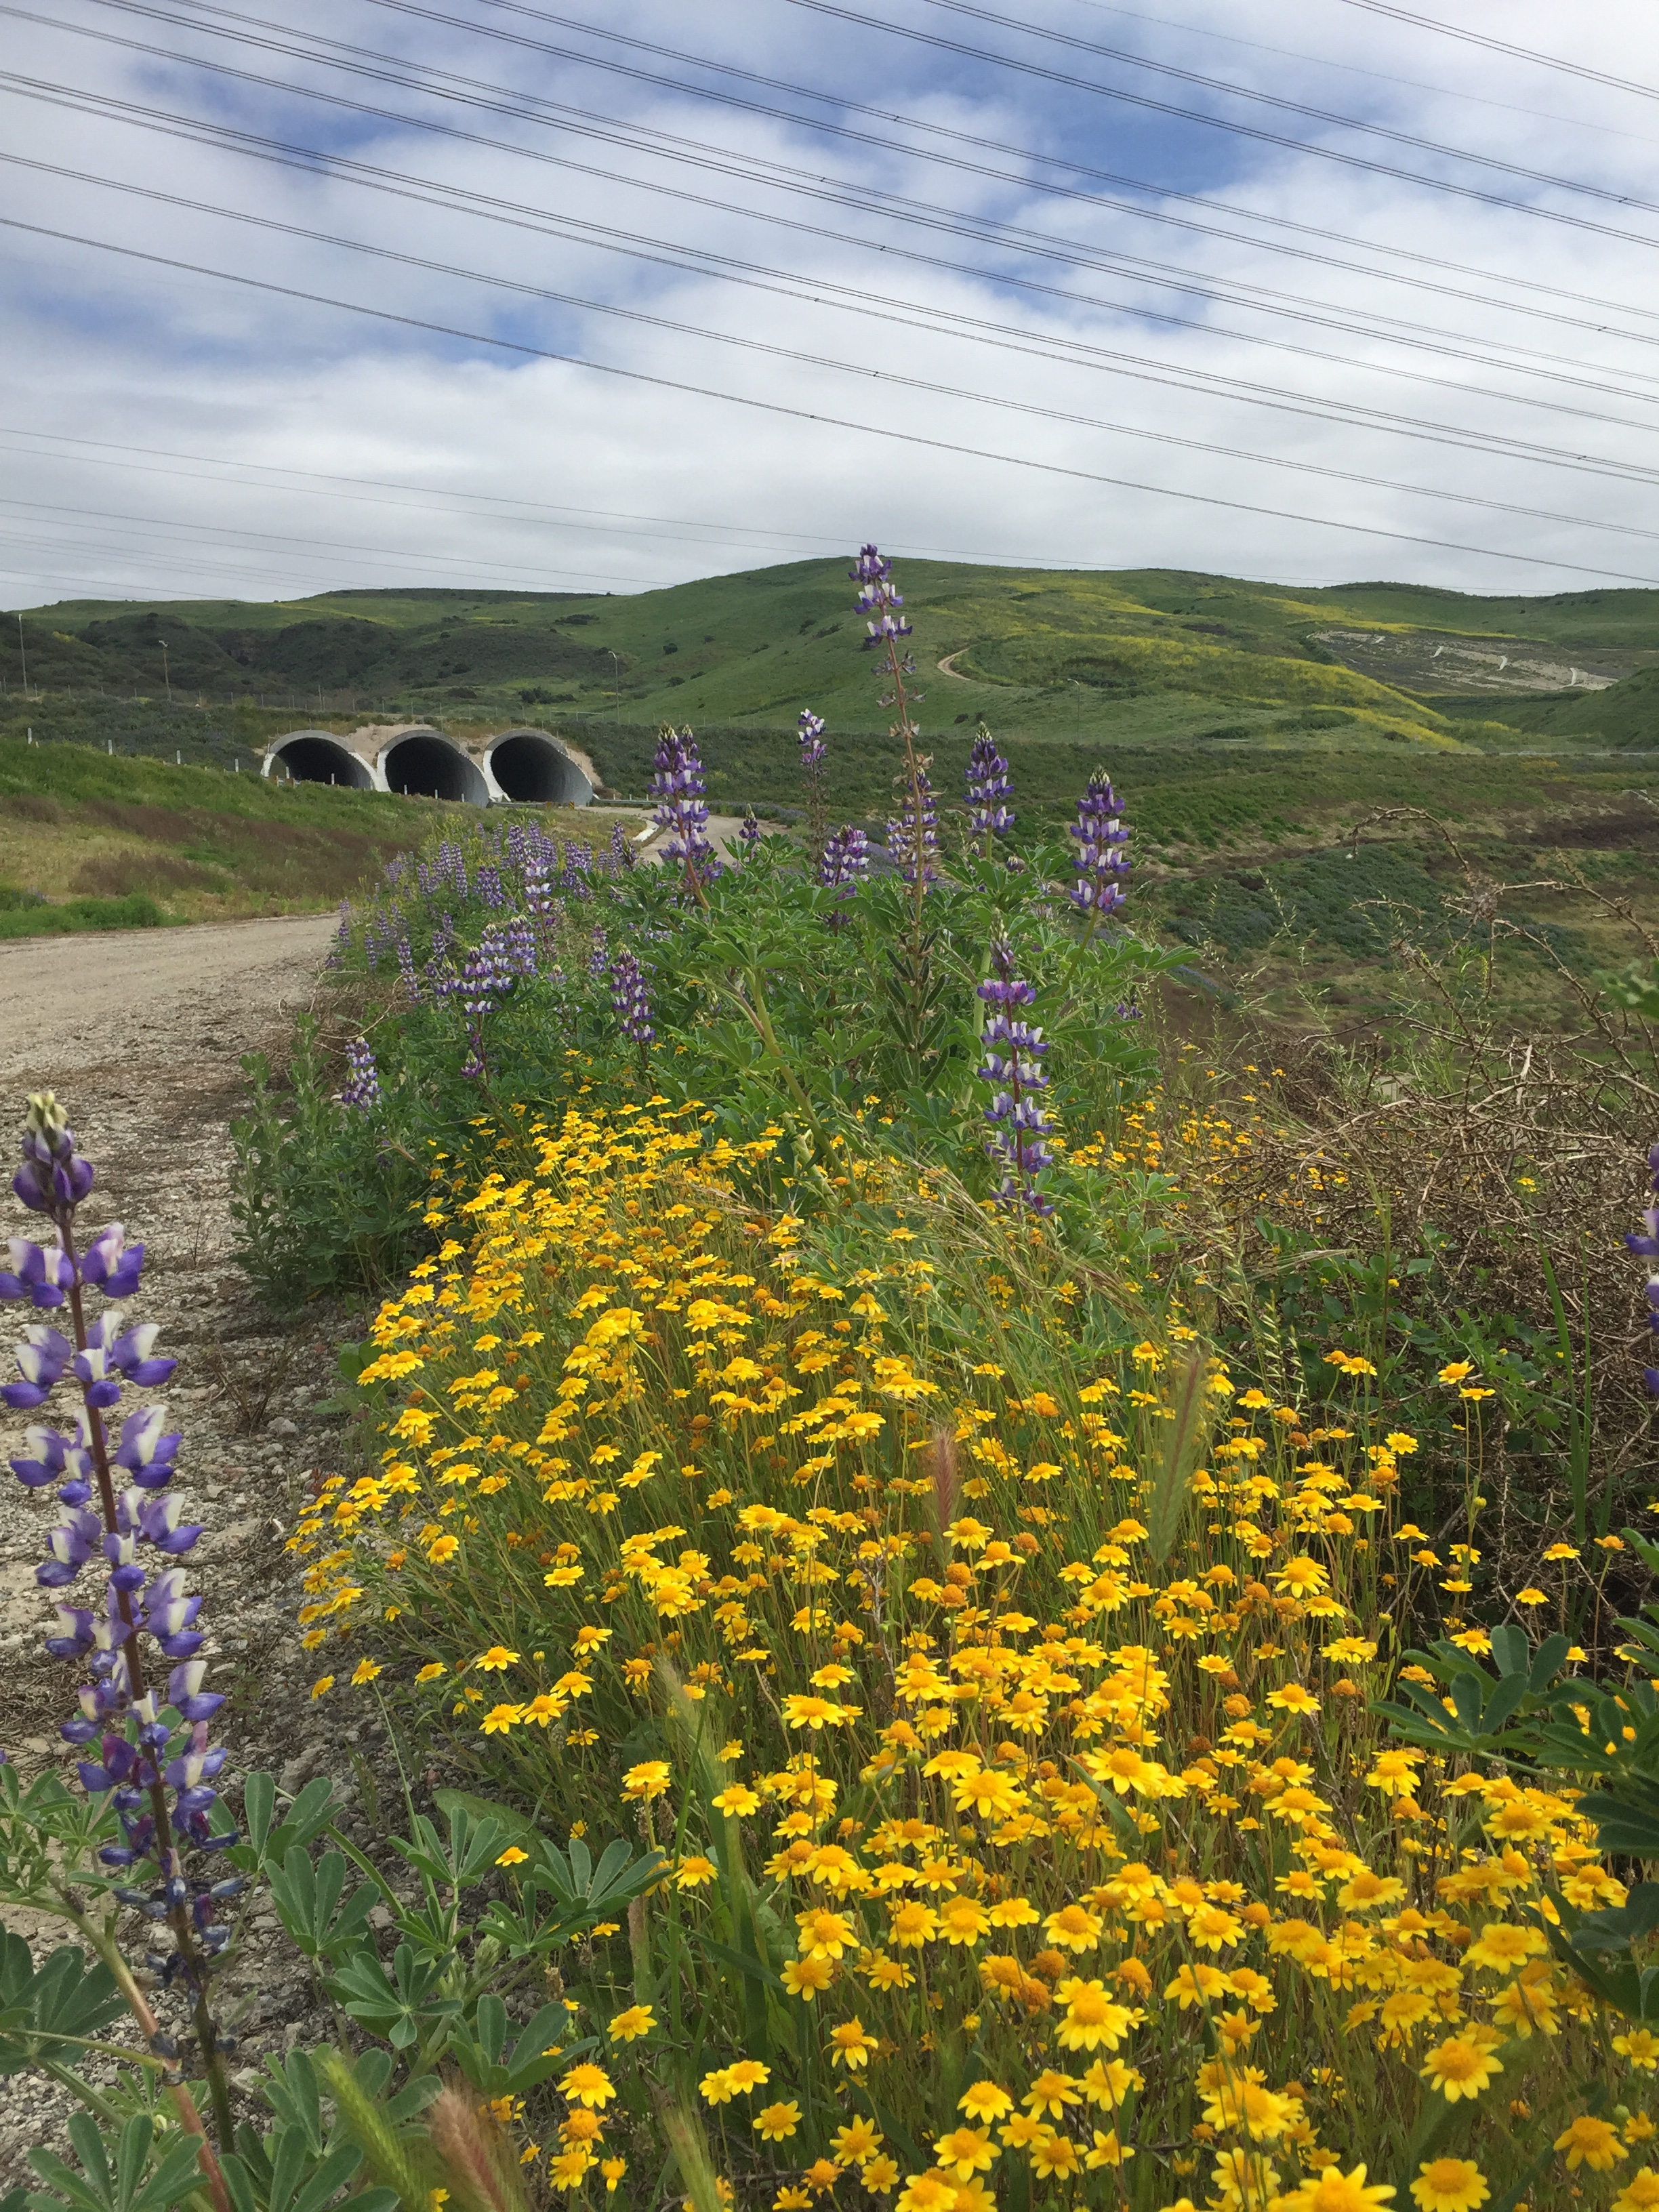 goldfields & lupines with tunnels